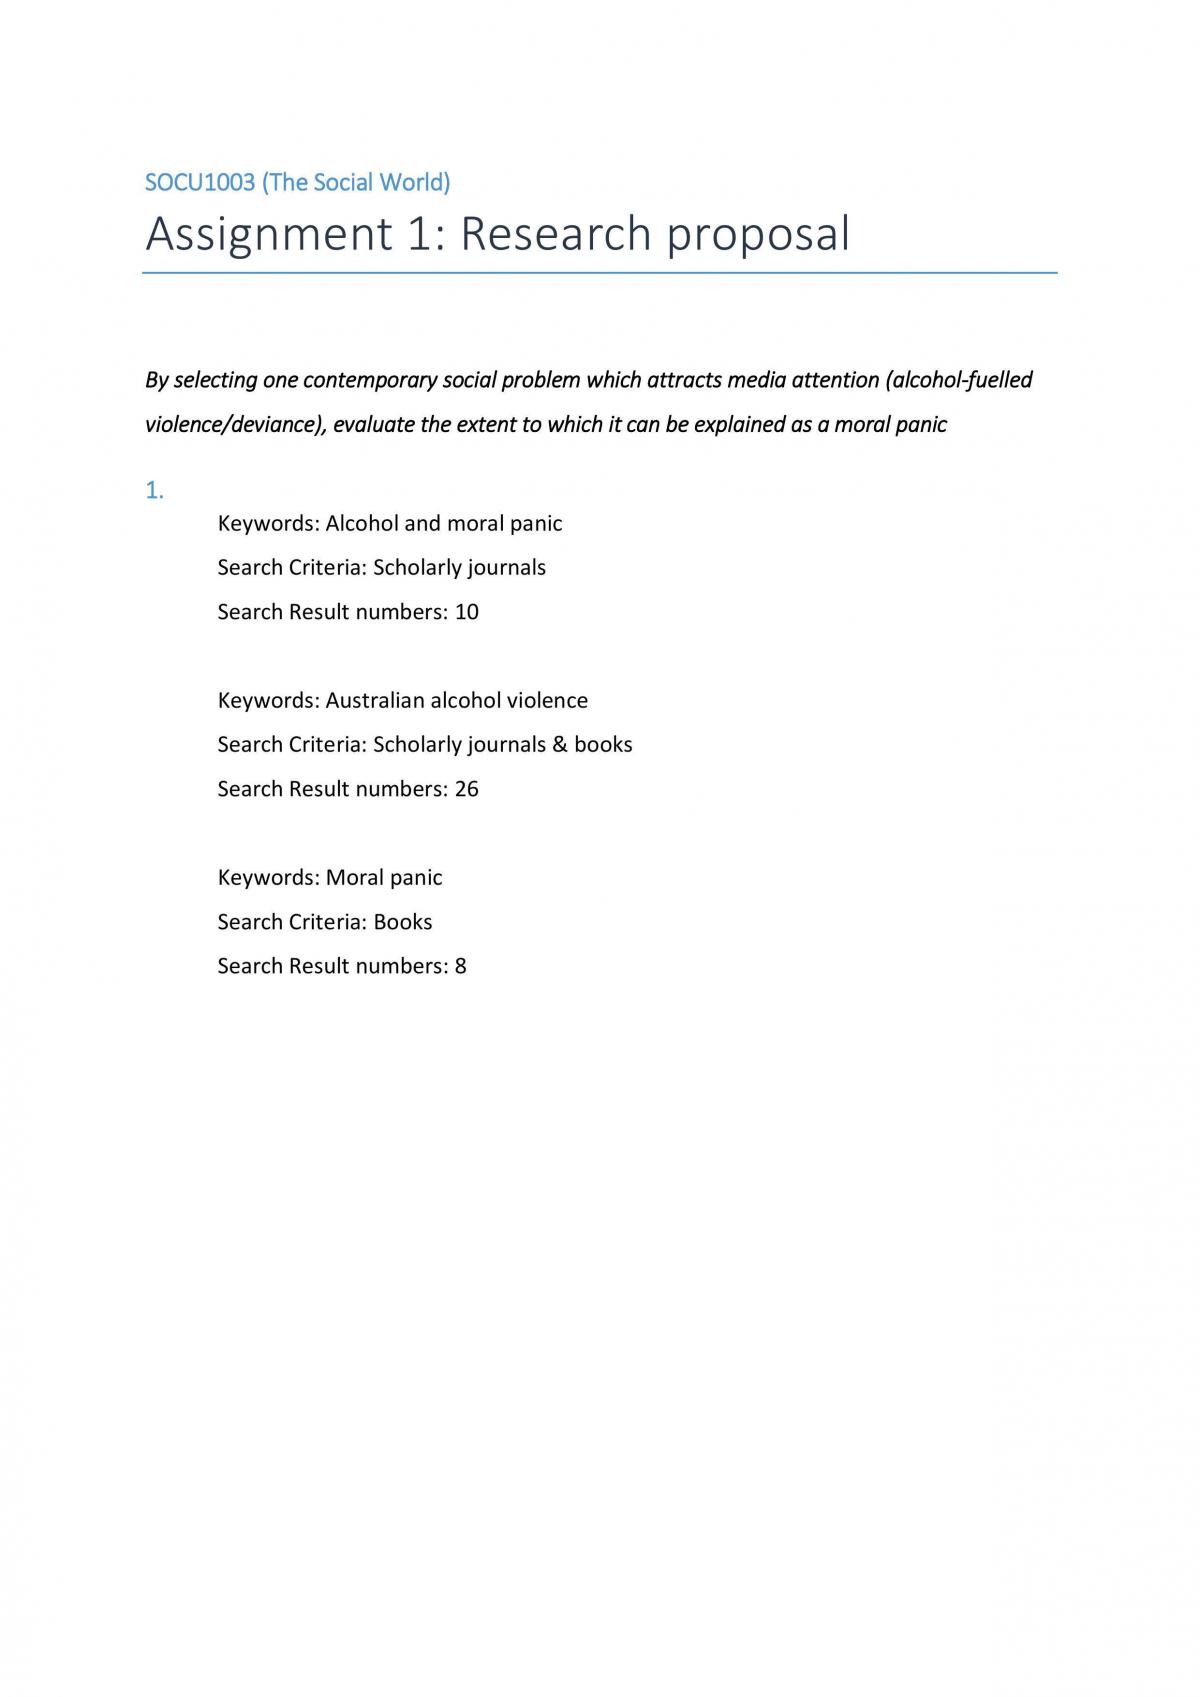 The Social World Research Proposal - Page 1